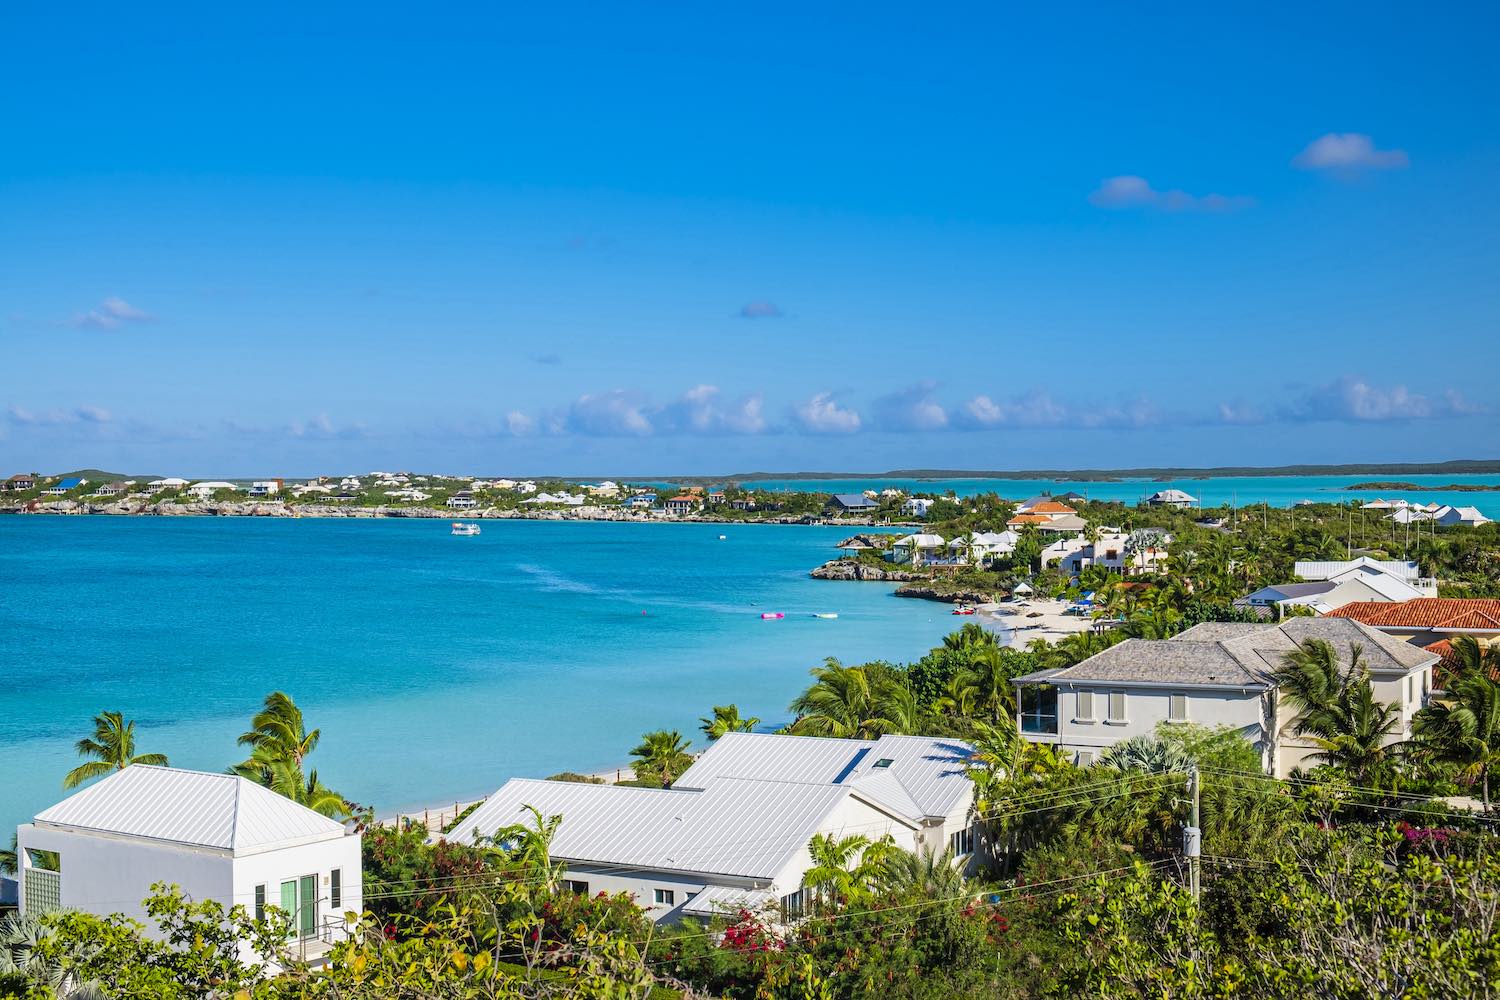 View From Sapodilla Bay Hill Historical Site In Turks and Caicos